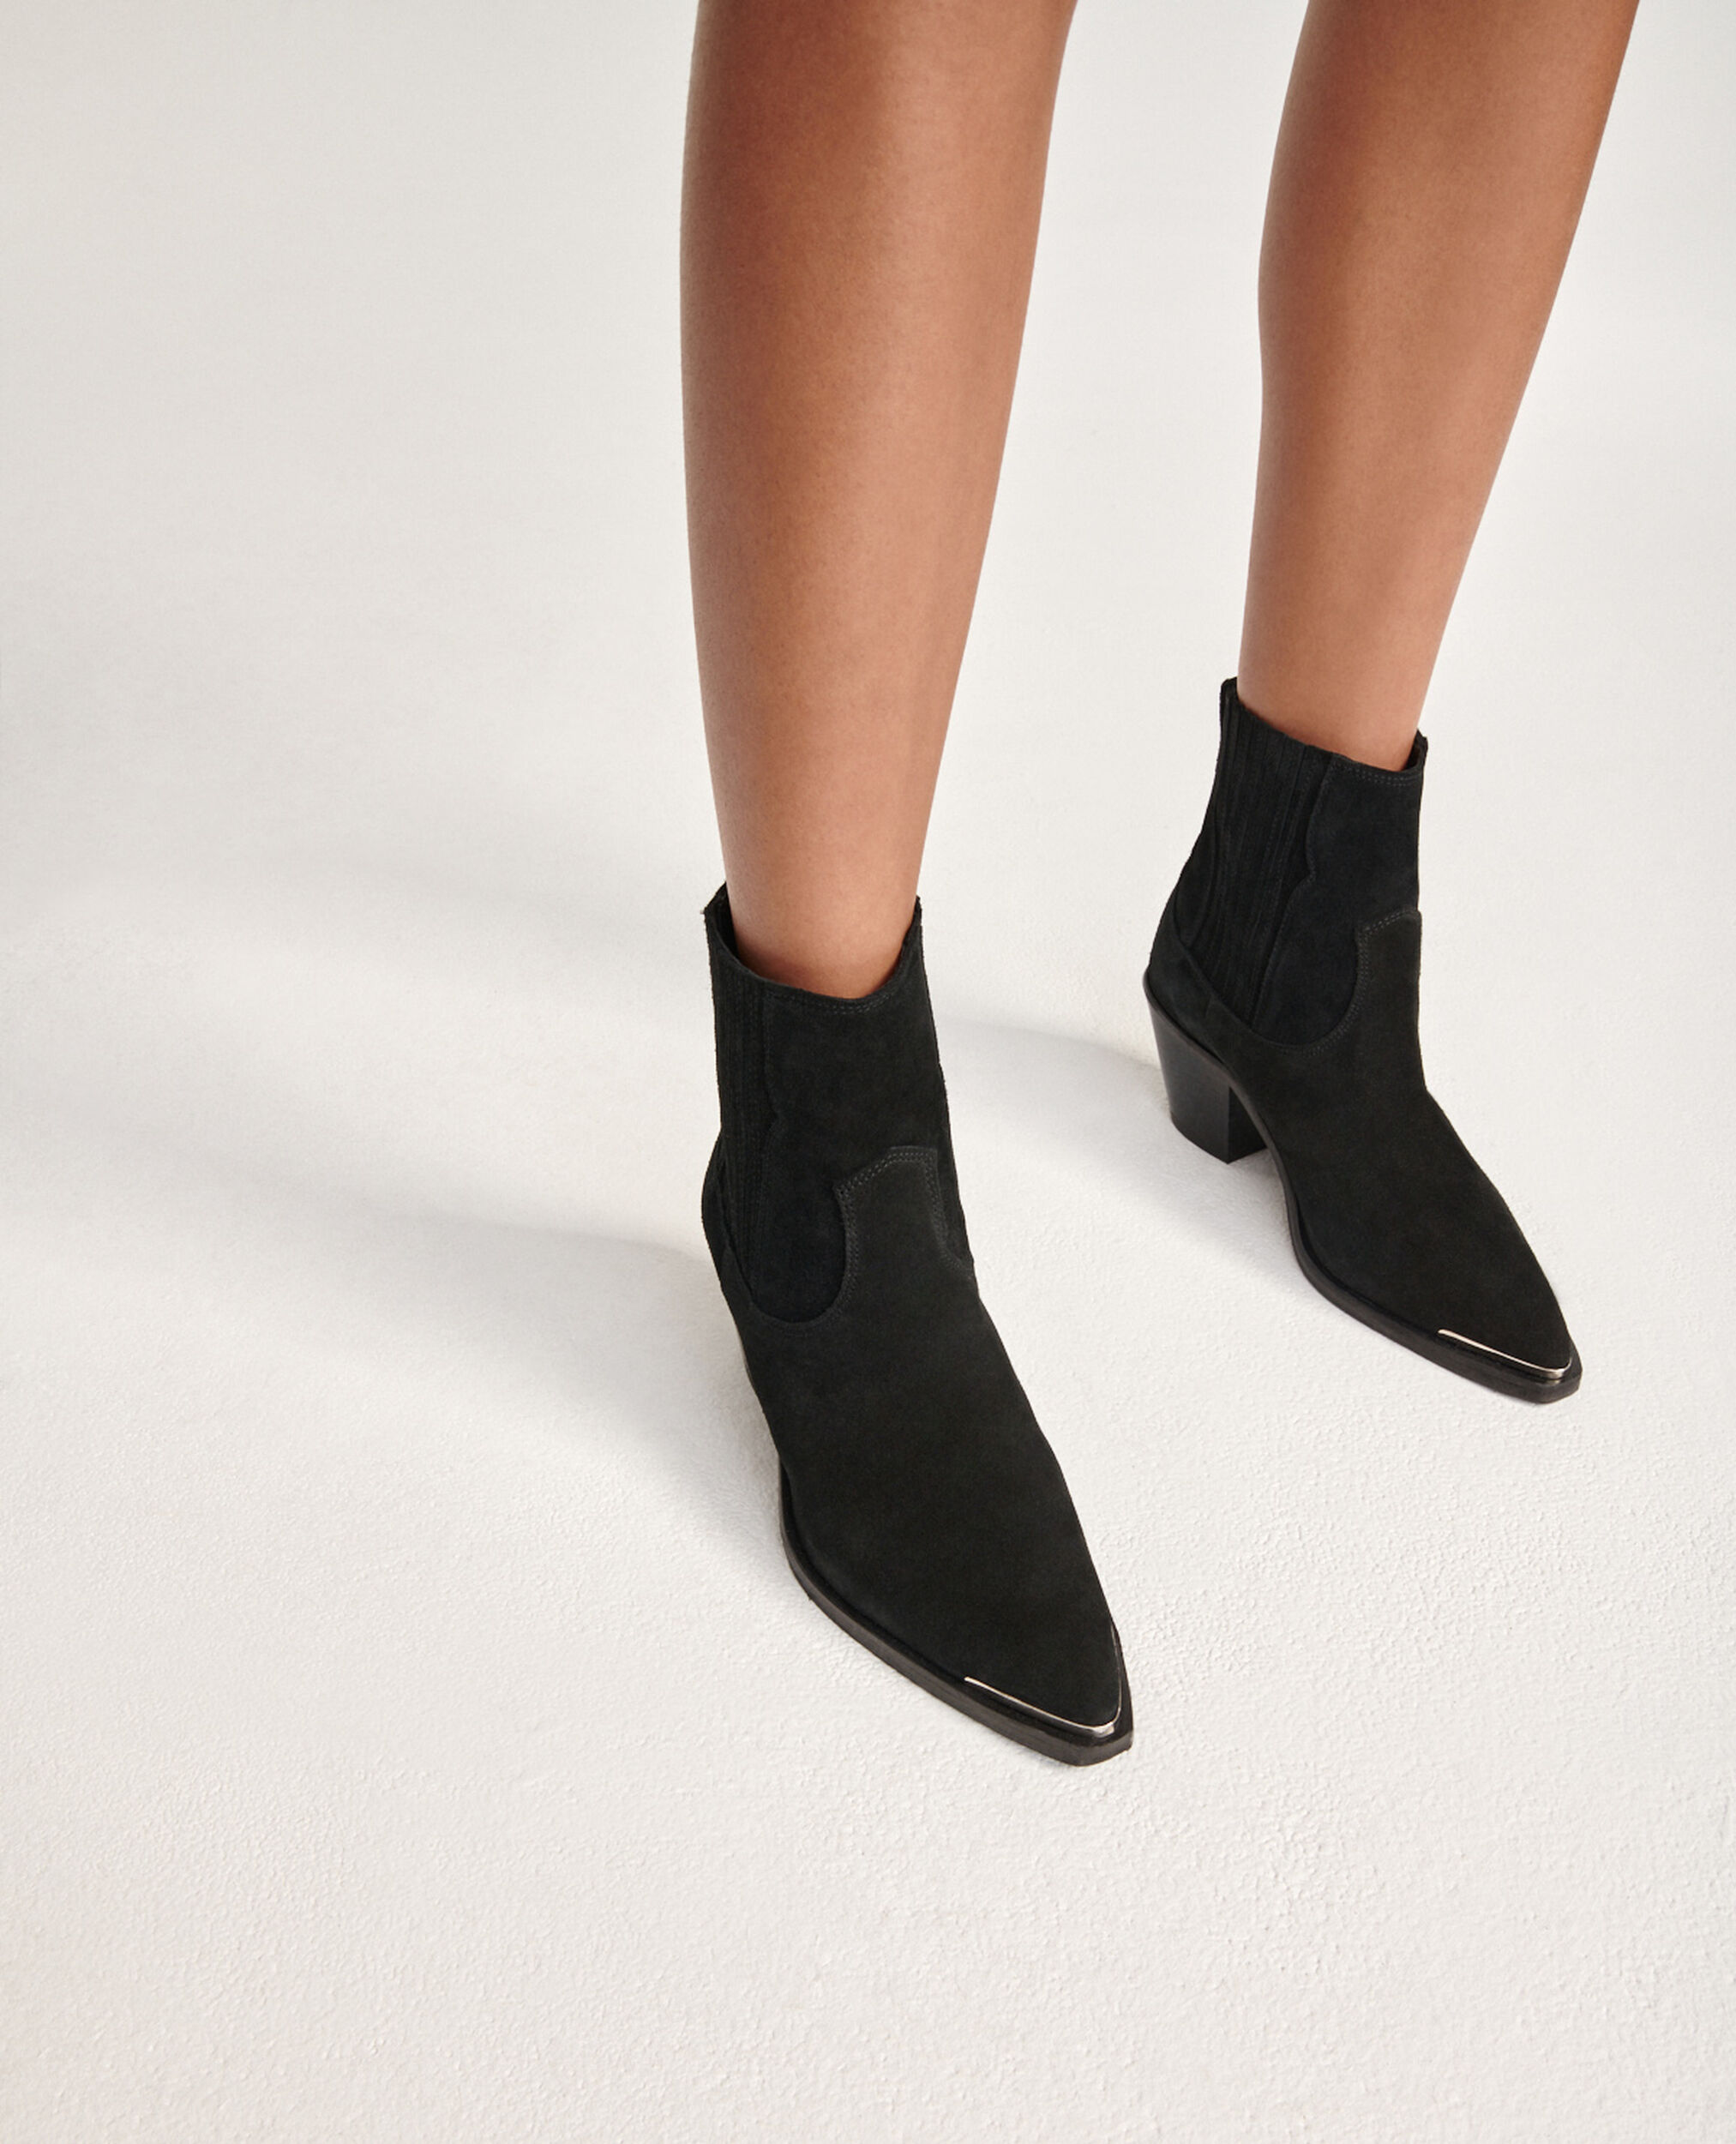 Western-style black suede ankle boots